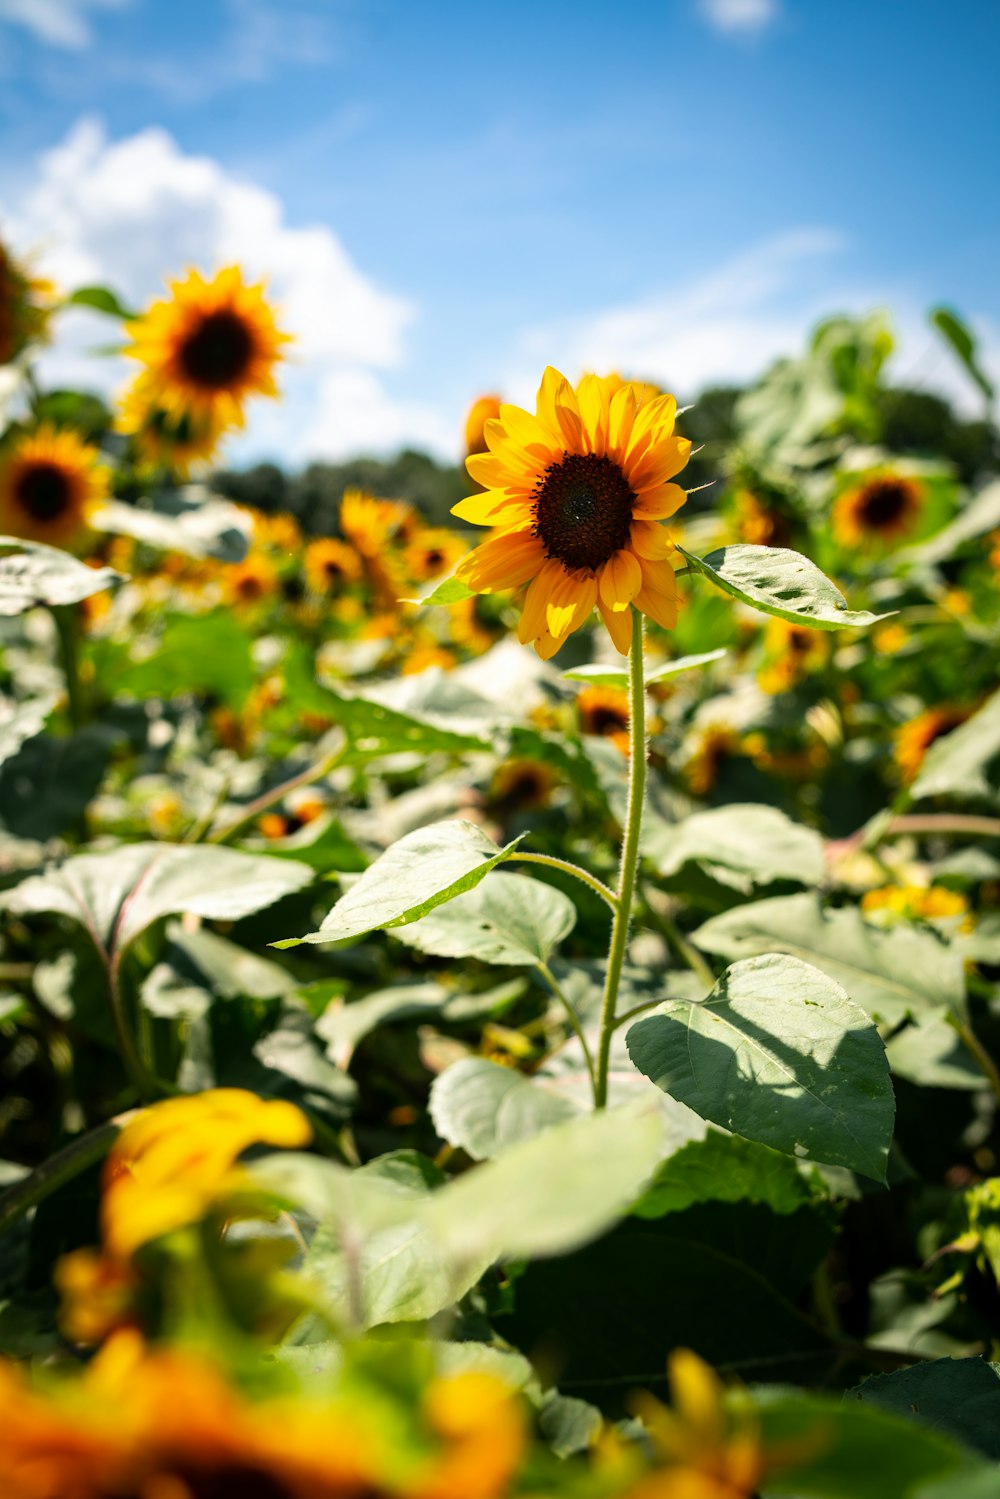 Sunflower Fields Pictures Download Free Images On Unsplash